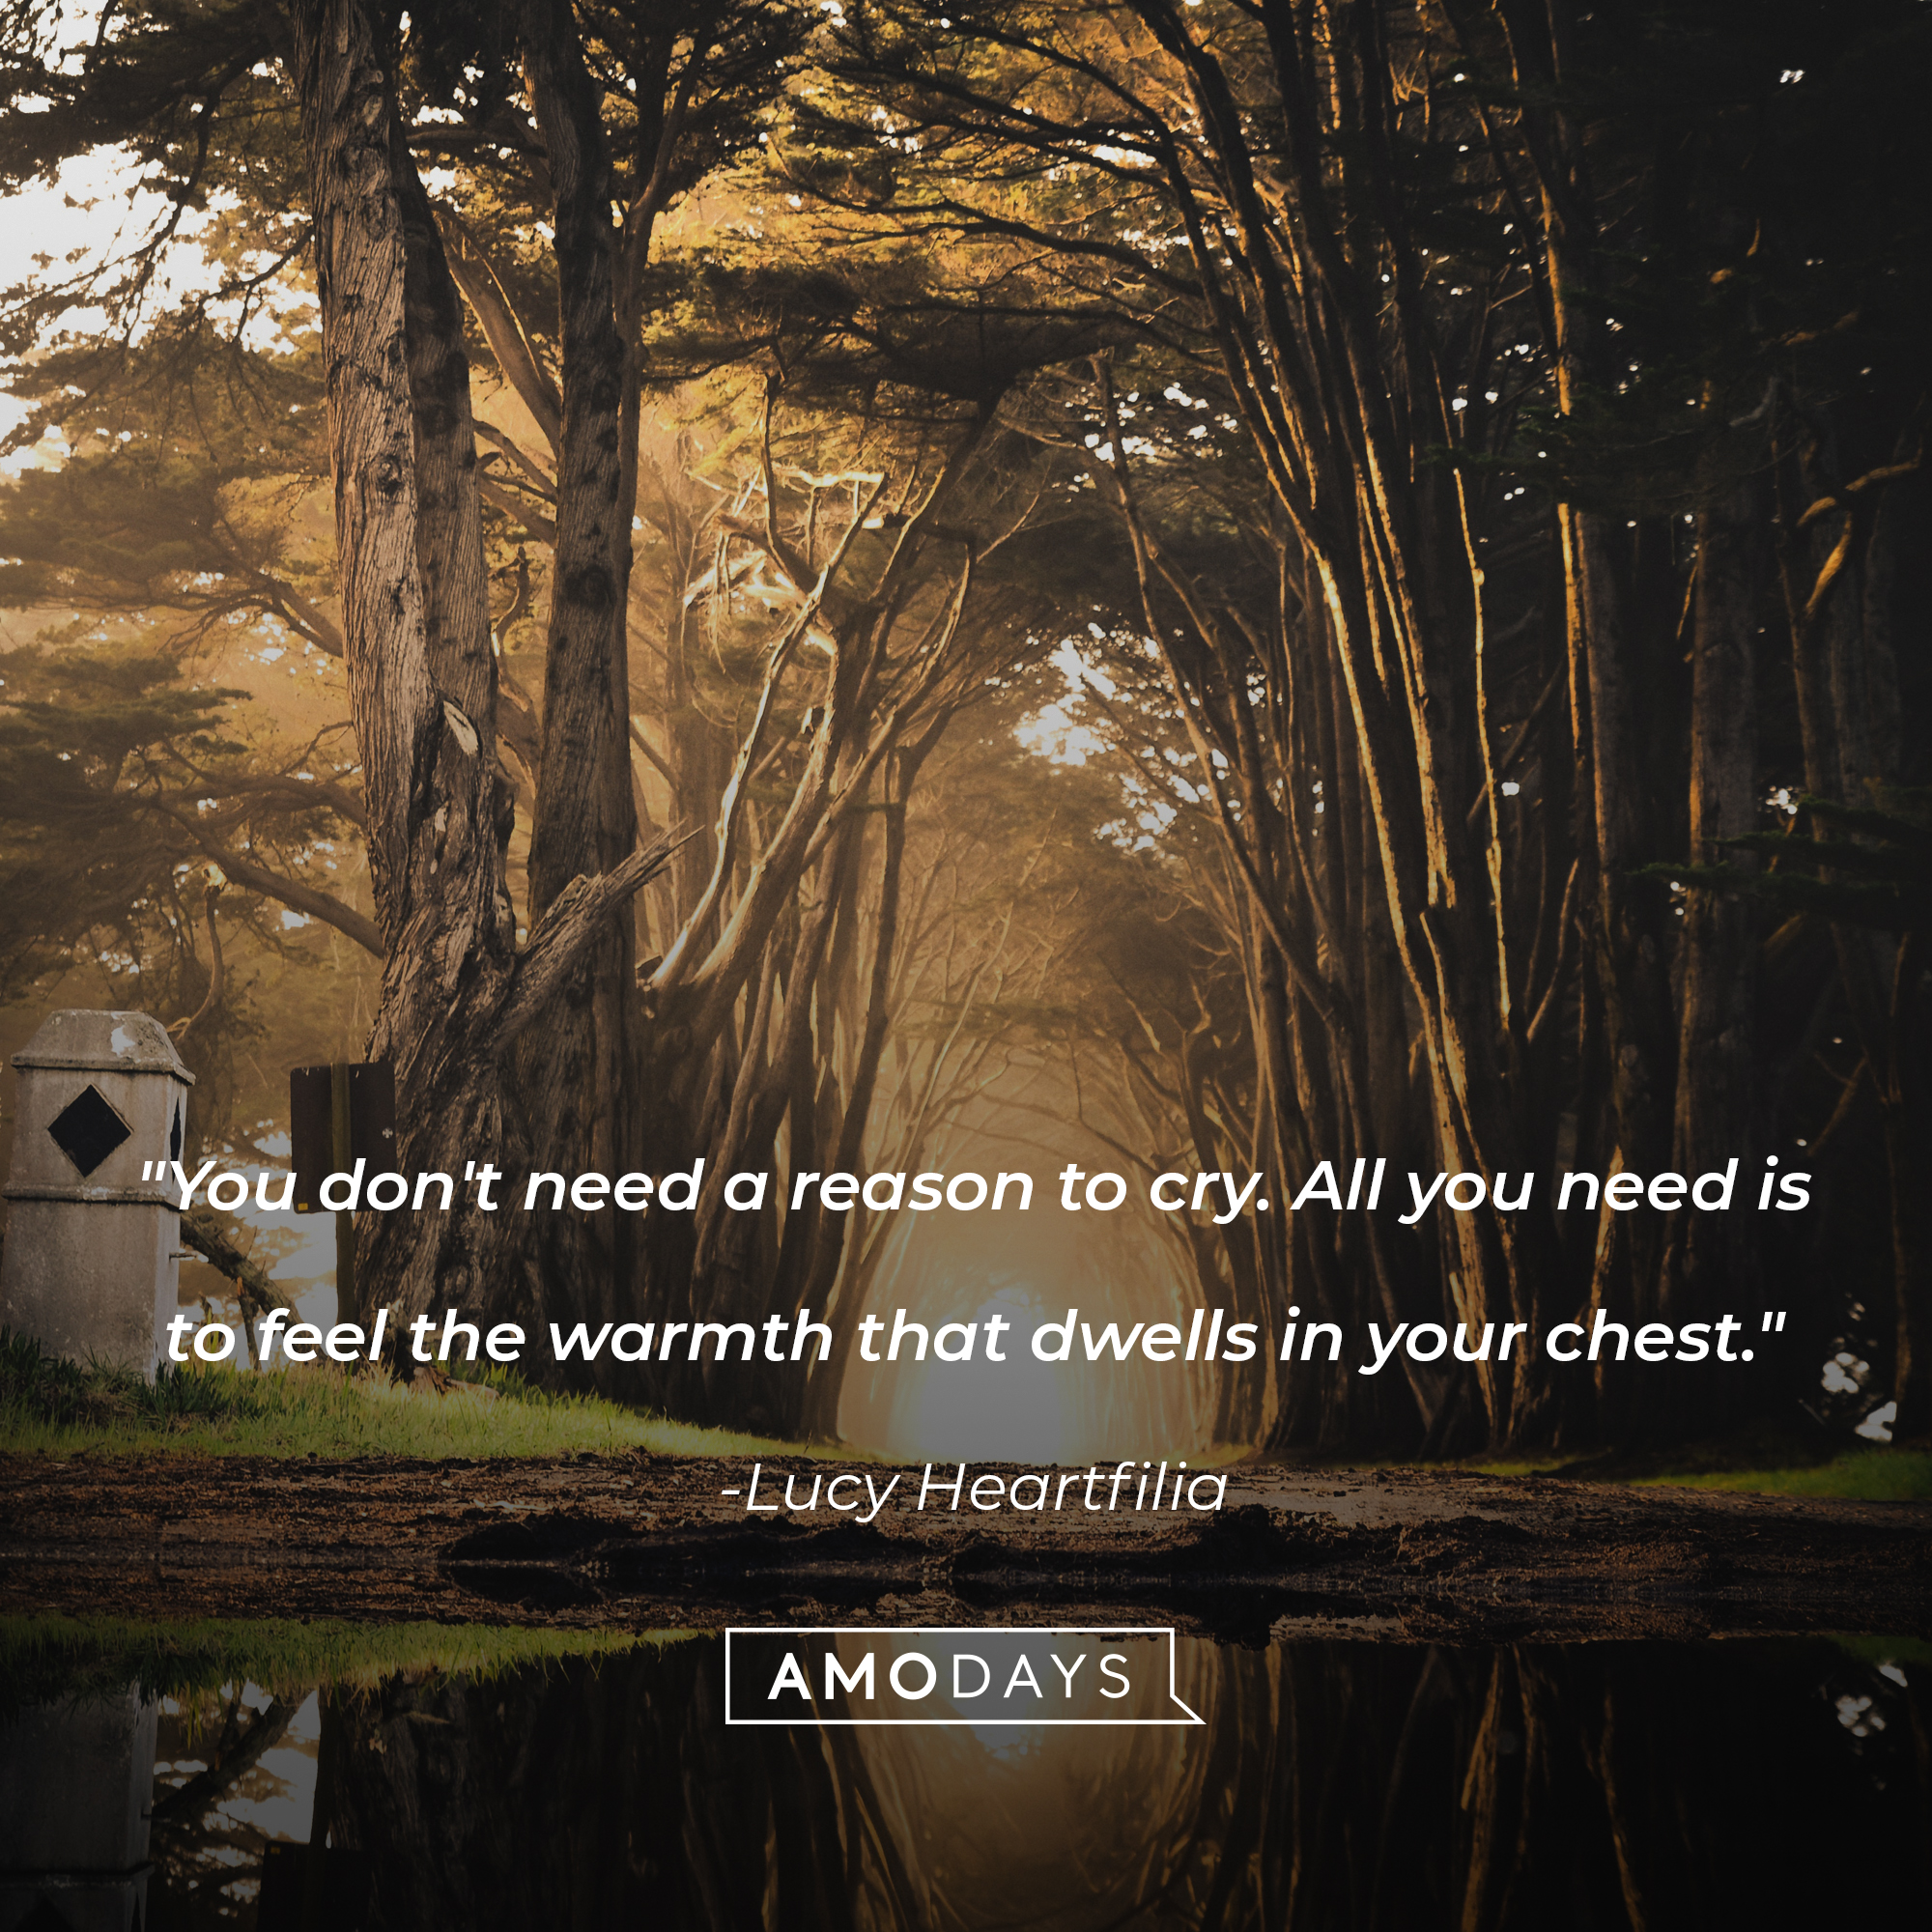 Lucy Heartfilia's quote: "You don't need a reason to cry. All you need is to feel the warmth that dwells in your chest." | Image: Unsplash